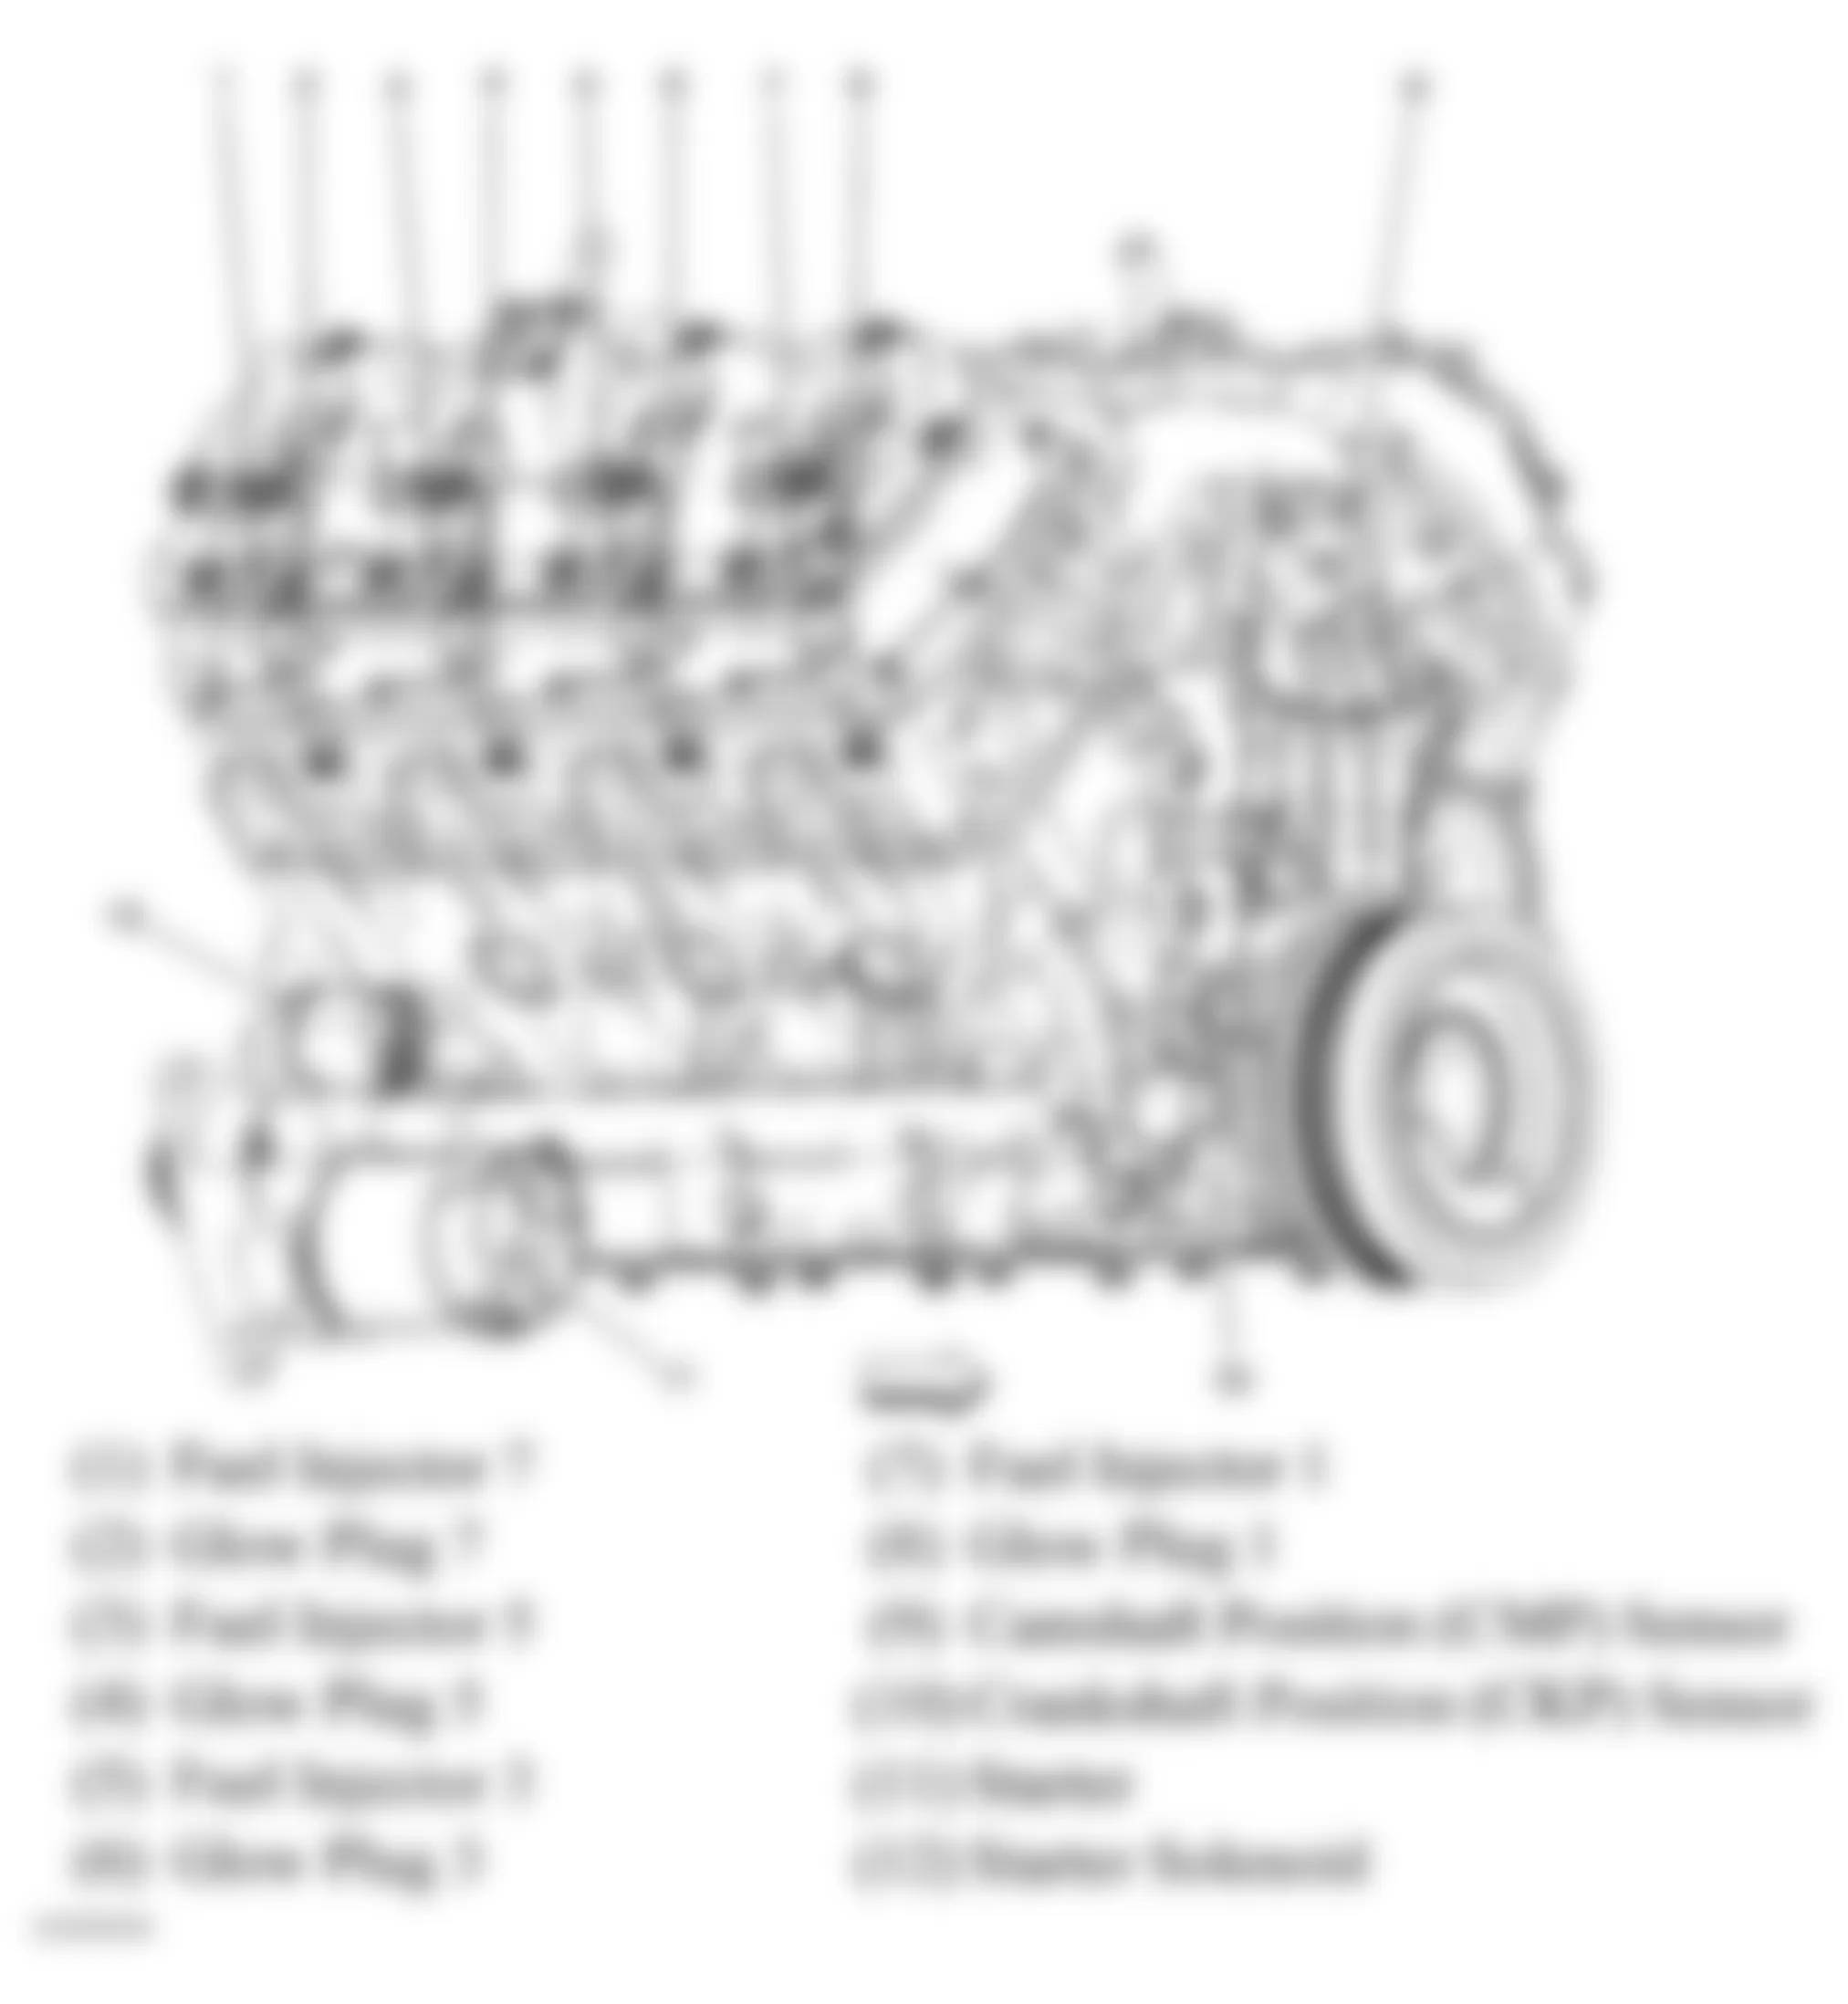 GMC Savana H1500 2009 - Component Locations -  Right Side Of Engine (6.6L)